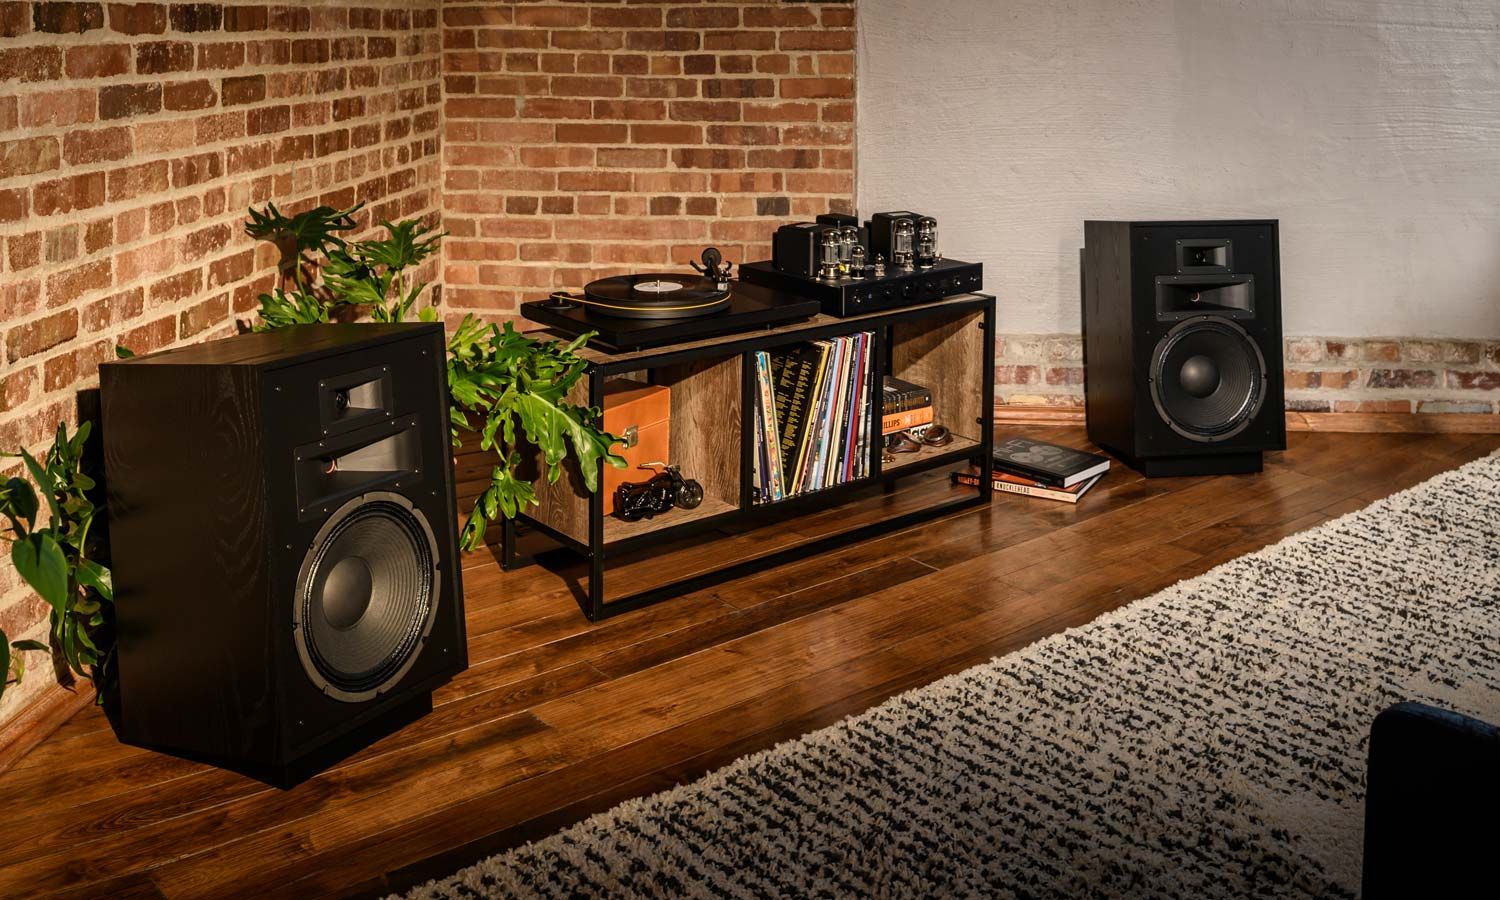 klipsch speakers sitting on the floor in a room with brick walls and wooden floors